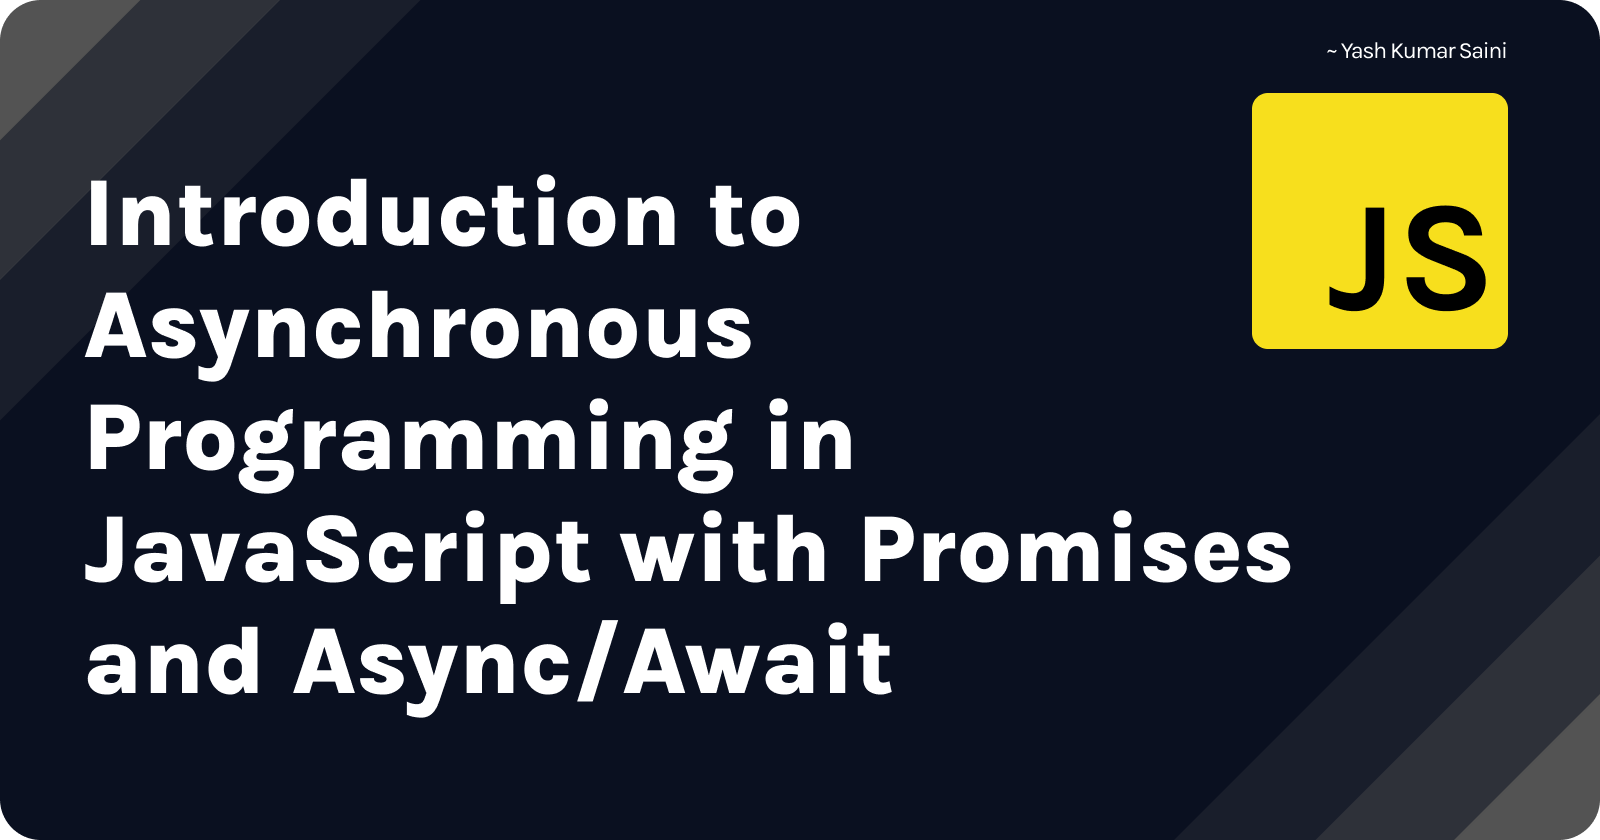 Introduction to Asynchronous Programming in JavaScript with Promises and Async/Await